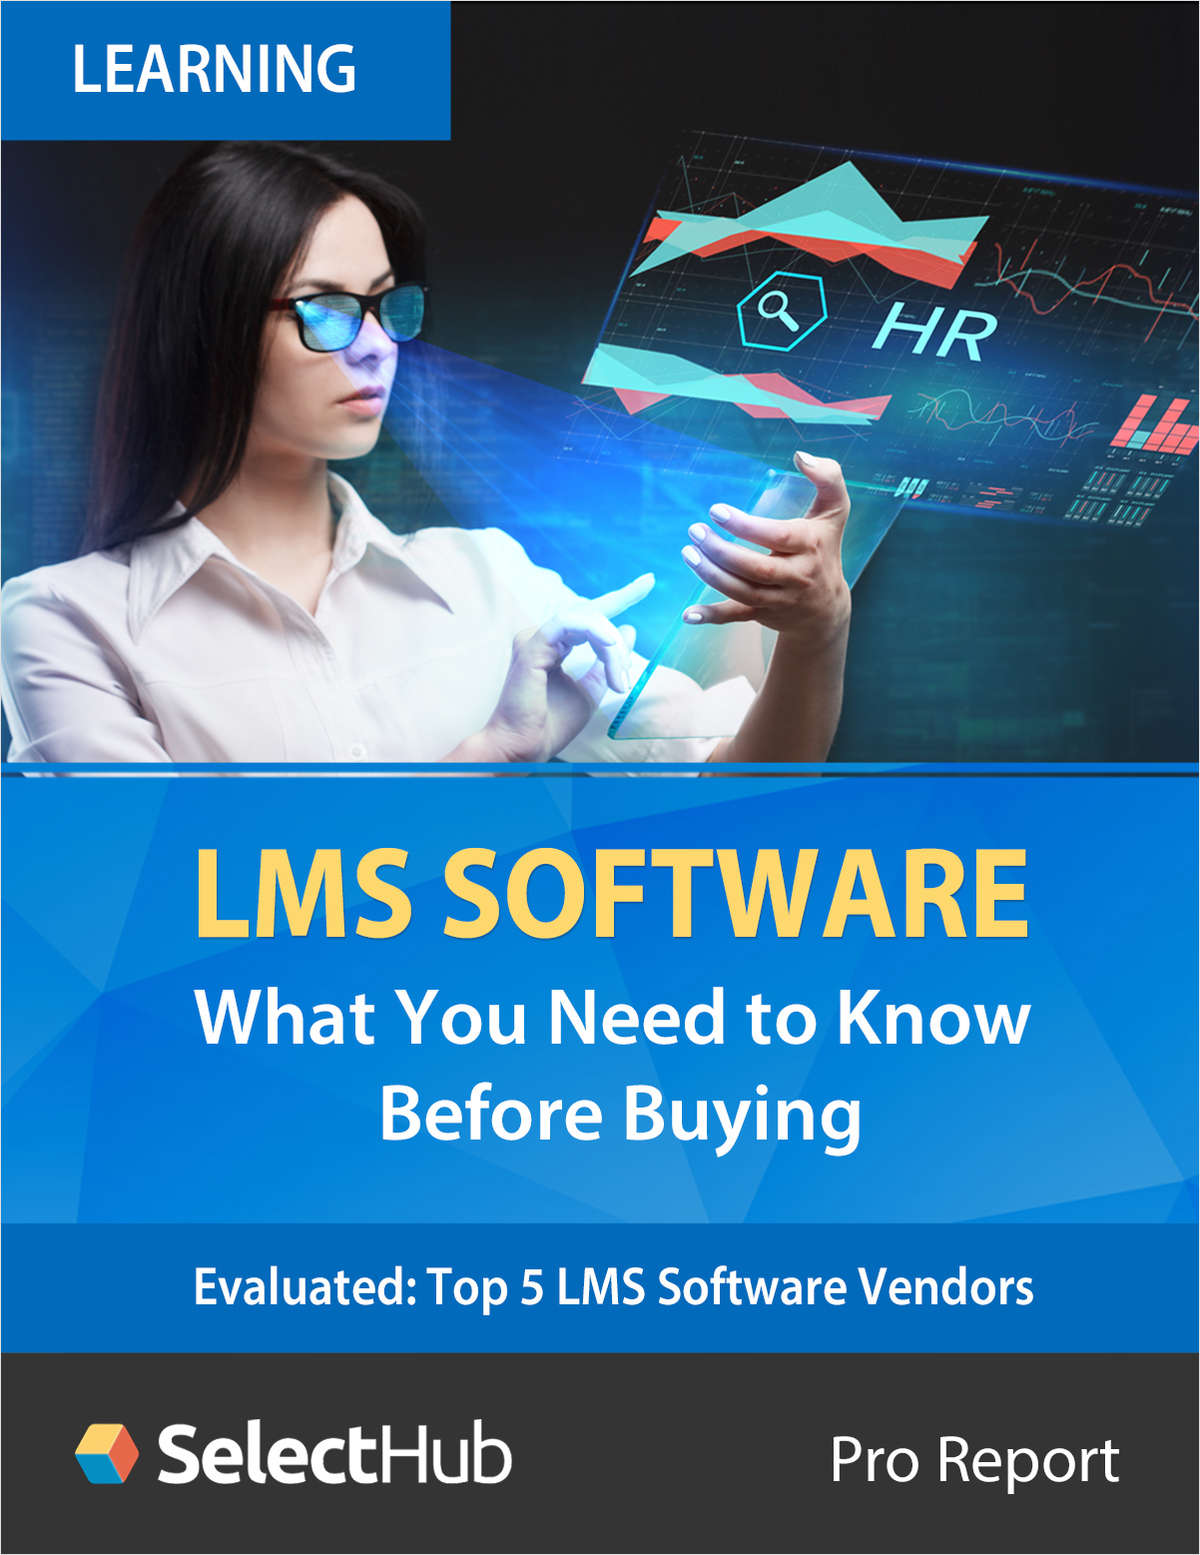 LMS Software: What You Need to Know Before Buying